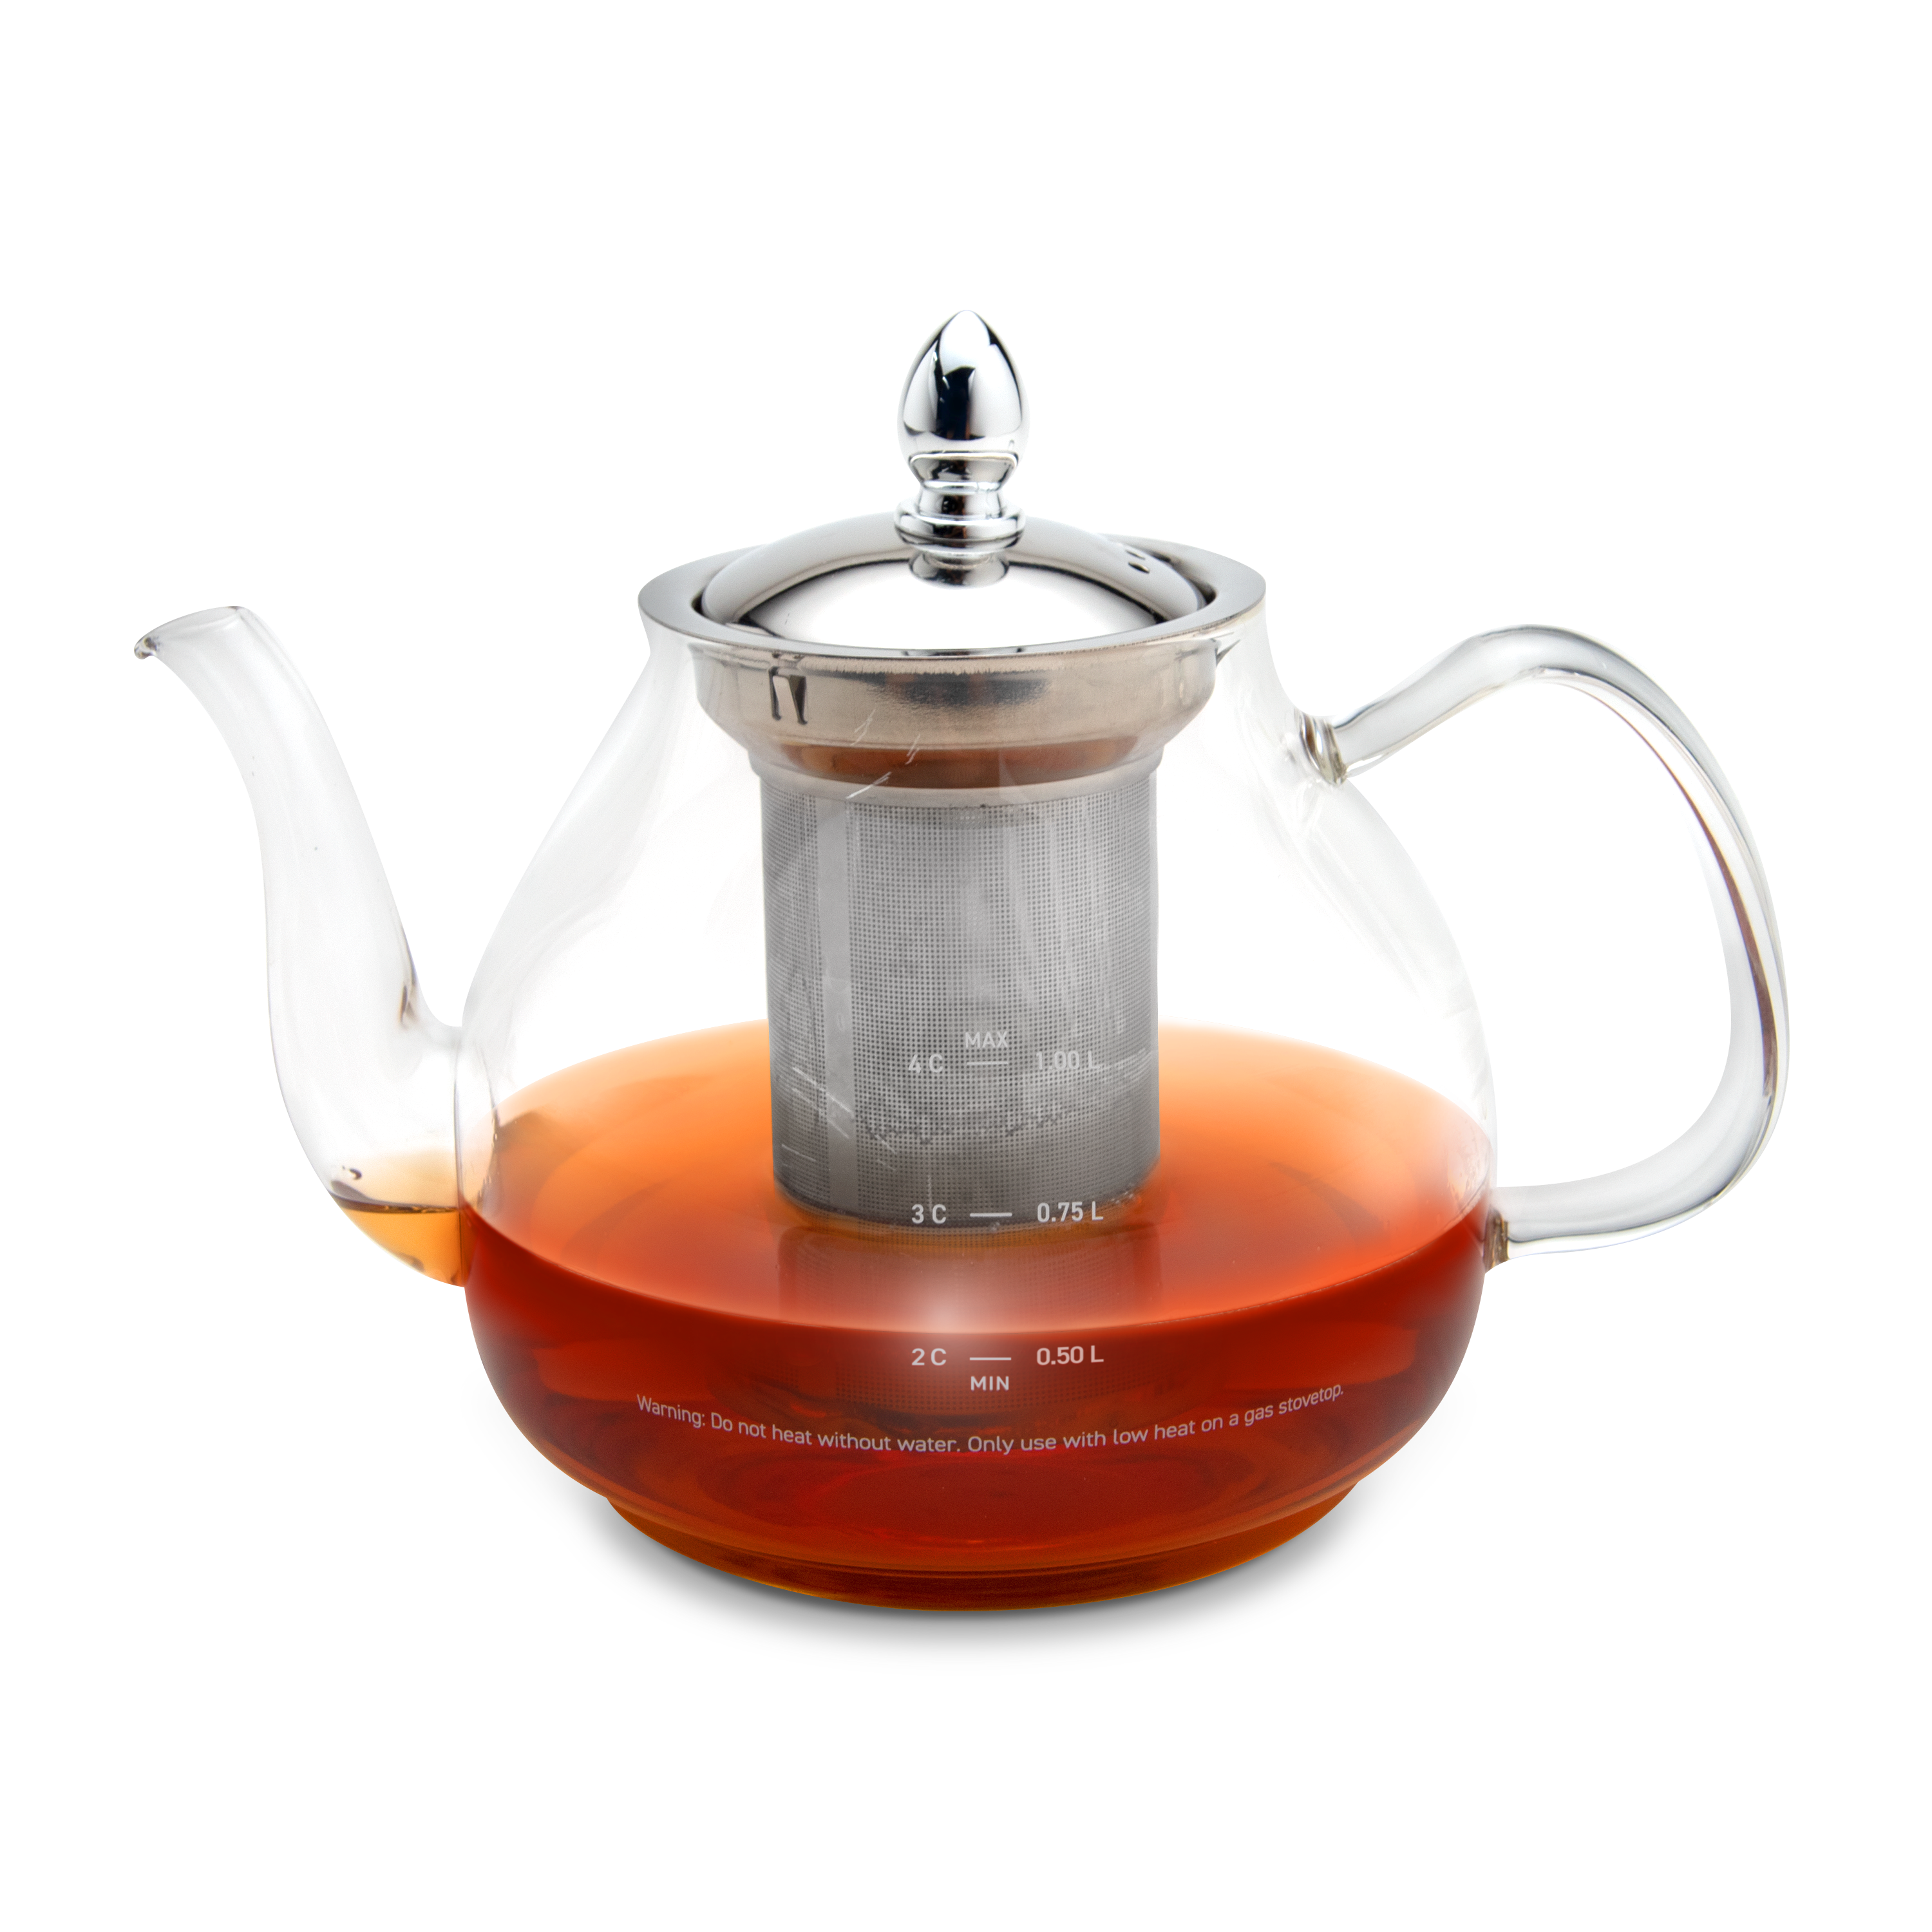 https://www.momjunction.com/wp-content/uploads/product-images/cosori-glass-teapot_afl716.png